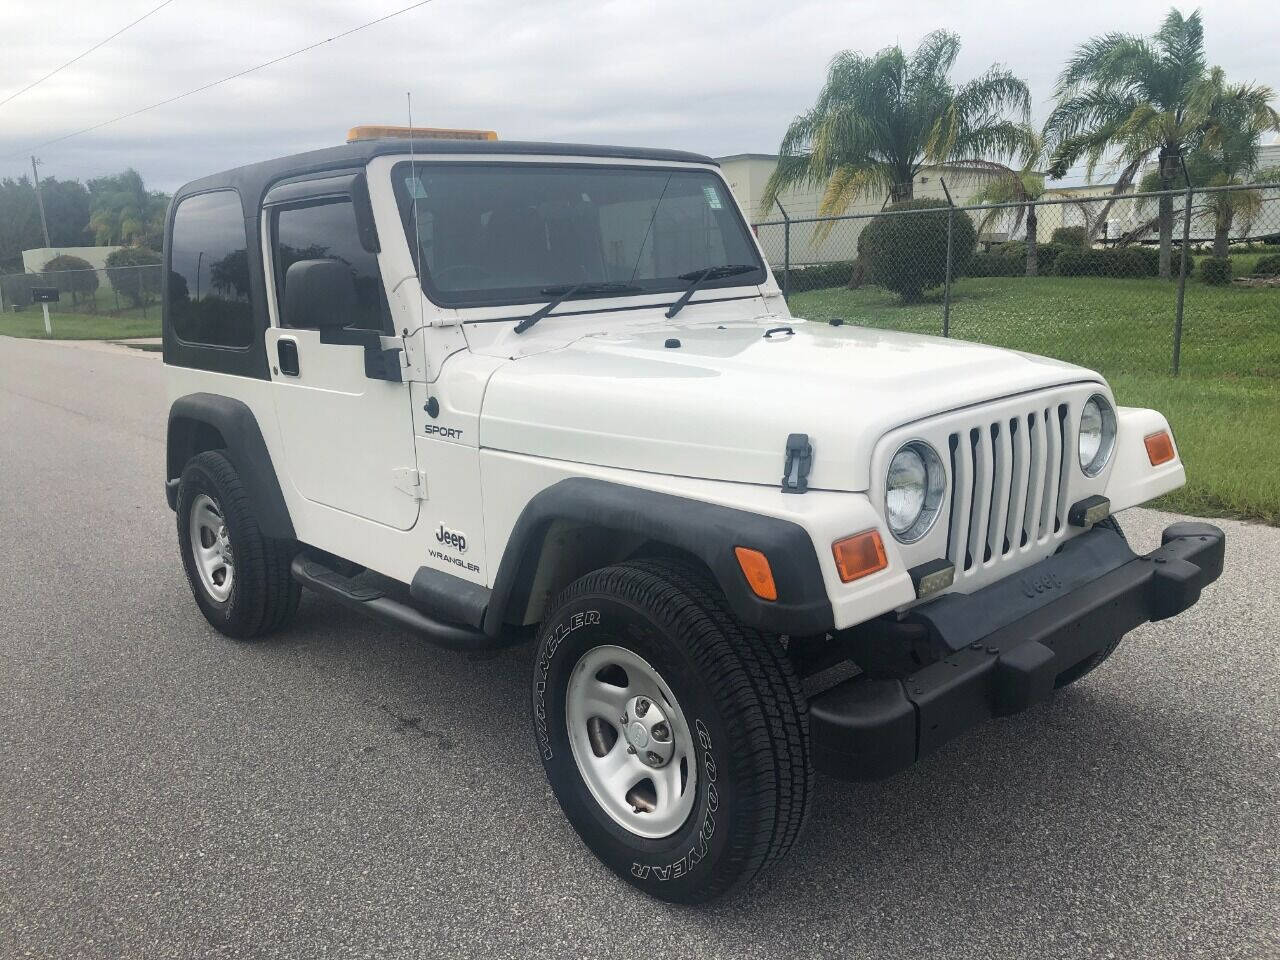 2006 Jeep Wrangler For Sale ®